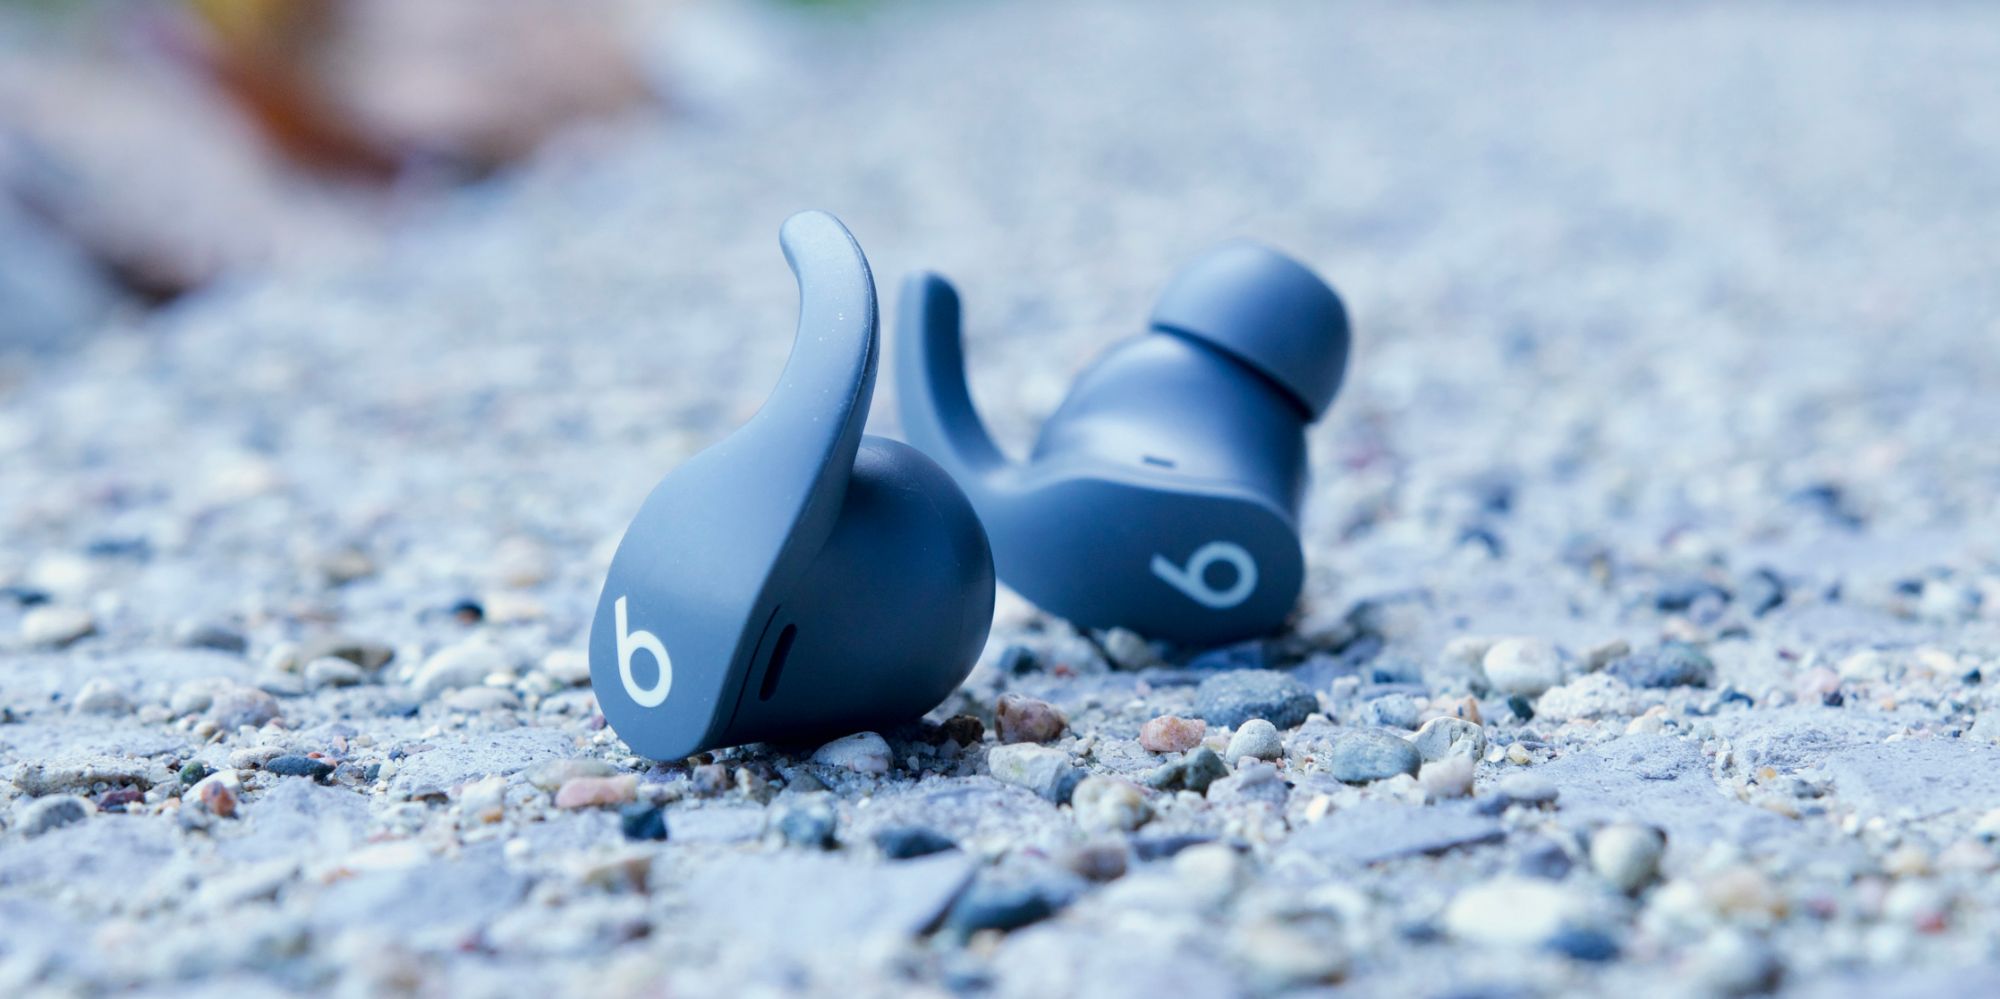 Beats Fit Pro earbuds